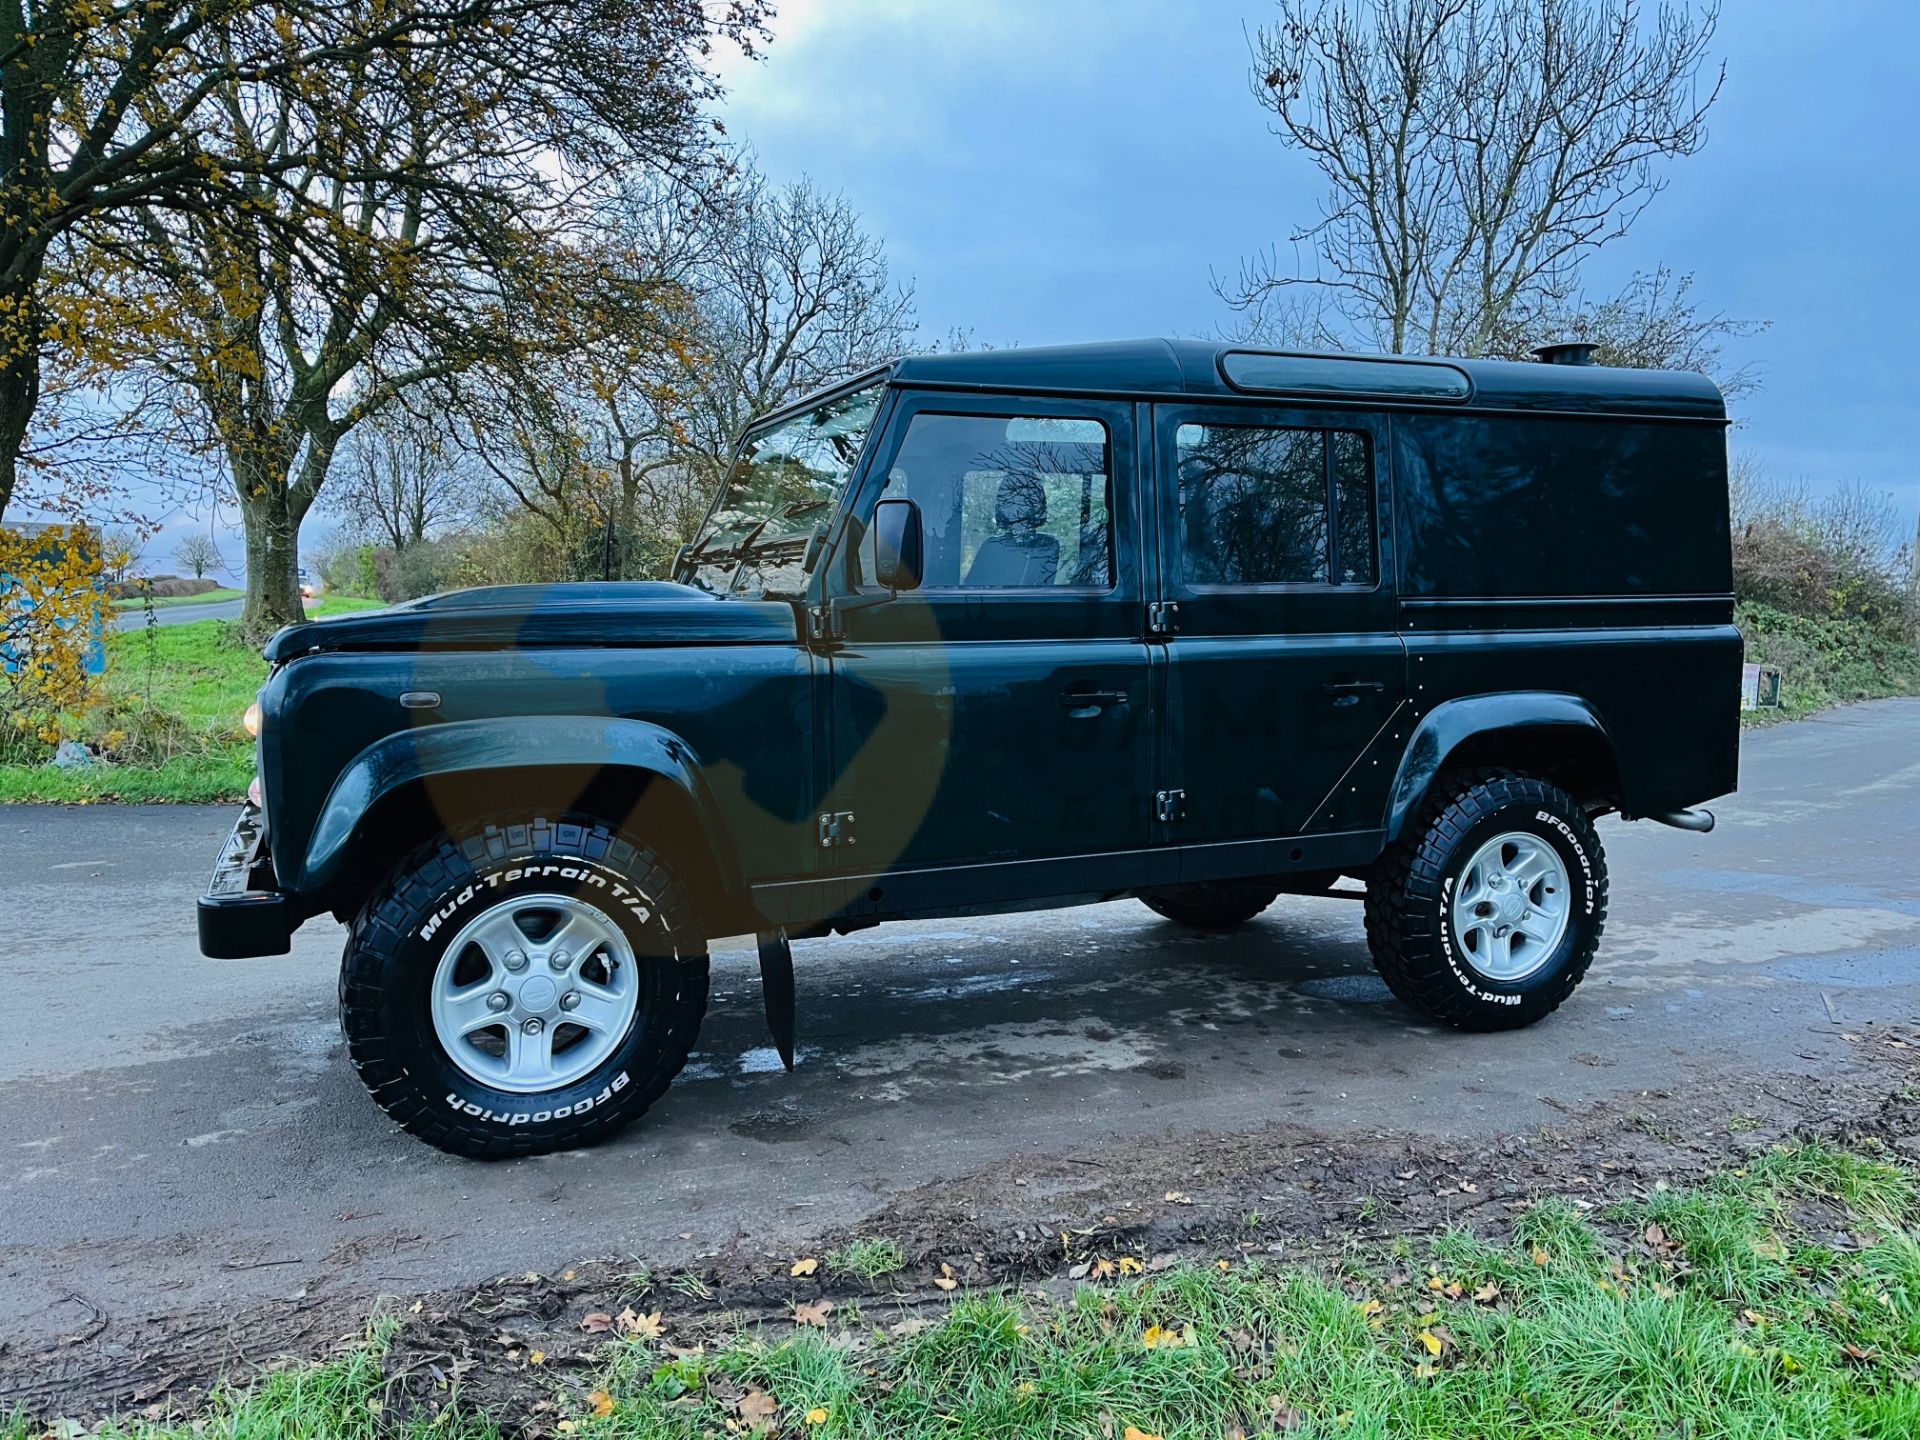 (ON SALE) LAND ROVER DEFENDER 110 2.2TDCI "COUNTY-UTILITY WAGON" (2016 MODEL) 37000 MILES LR HISTORY - Image 7 of 24